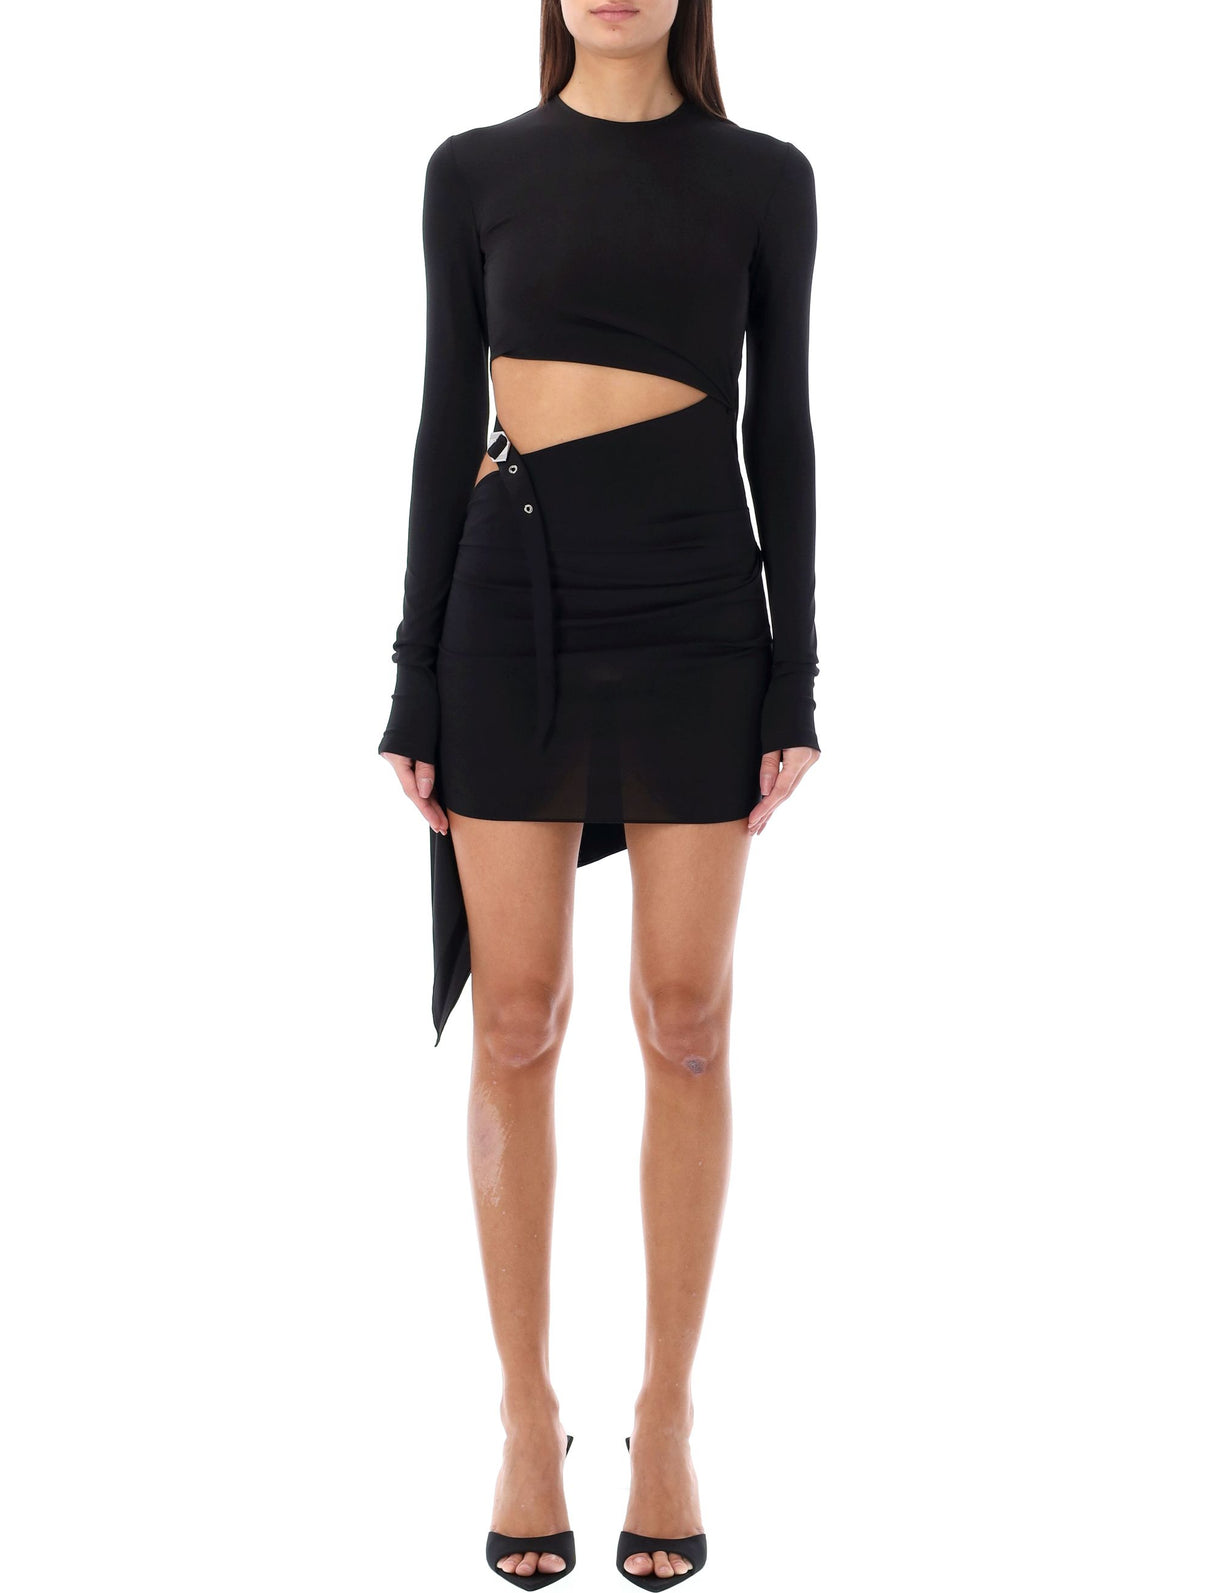 Refined and Chic Black Mini Dress for Ladies